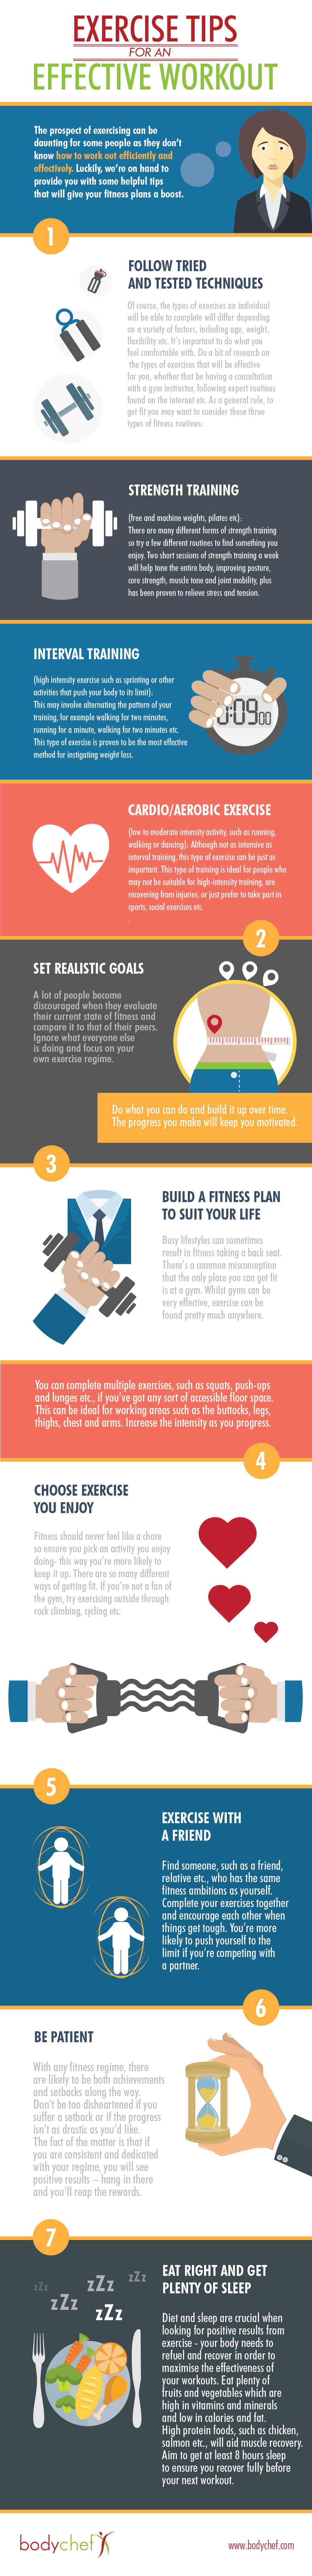 exercise tips infographic